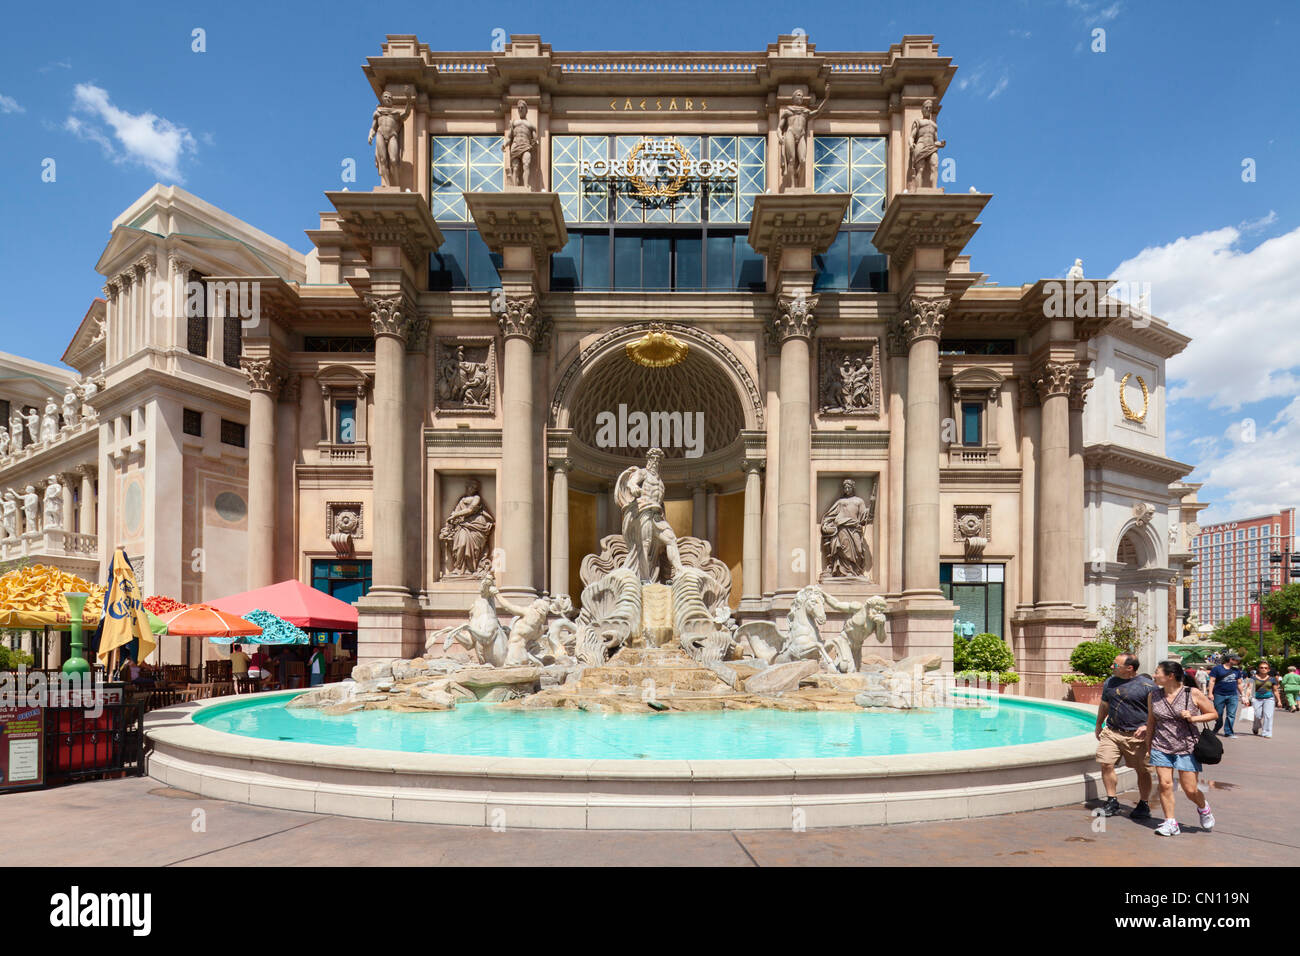 Forum Shops at Caesars Palace - Las Vegas - Love to Eat and Travel